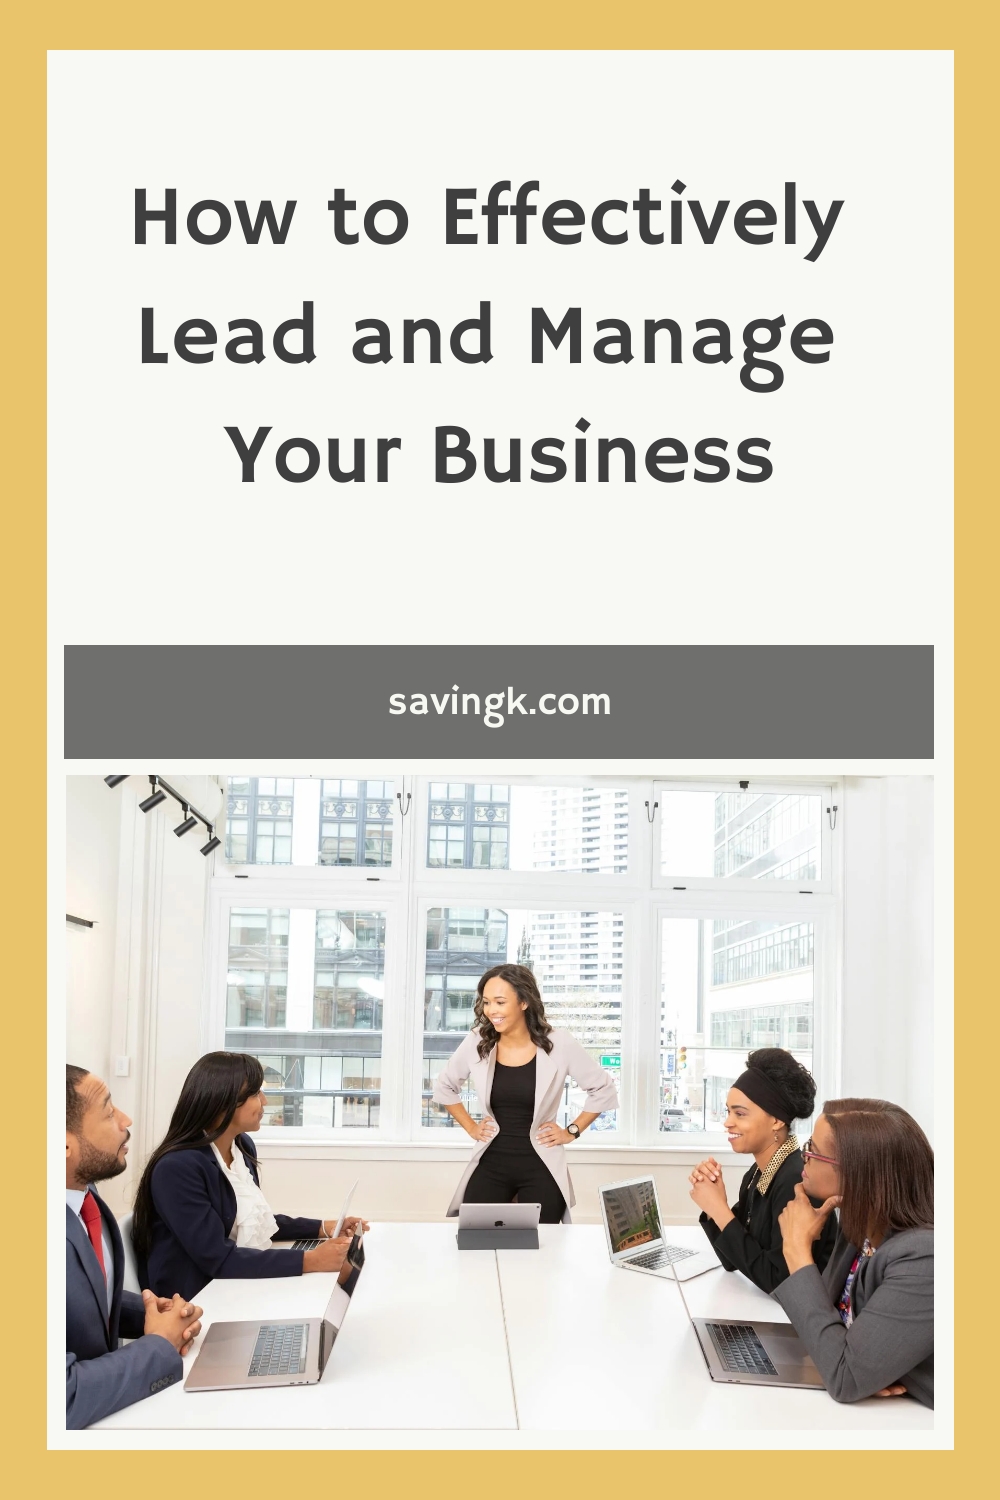 How to Effectively Lead and Manage Your Business